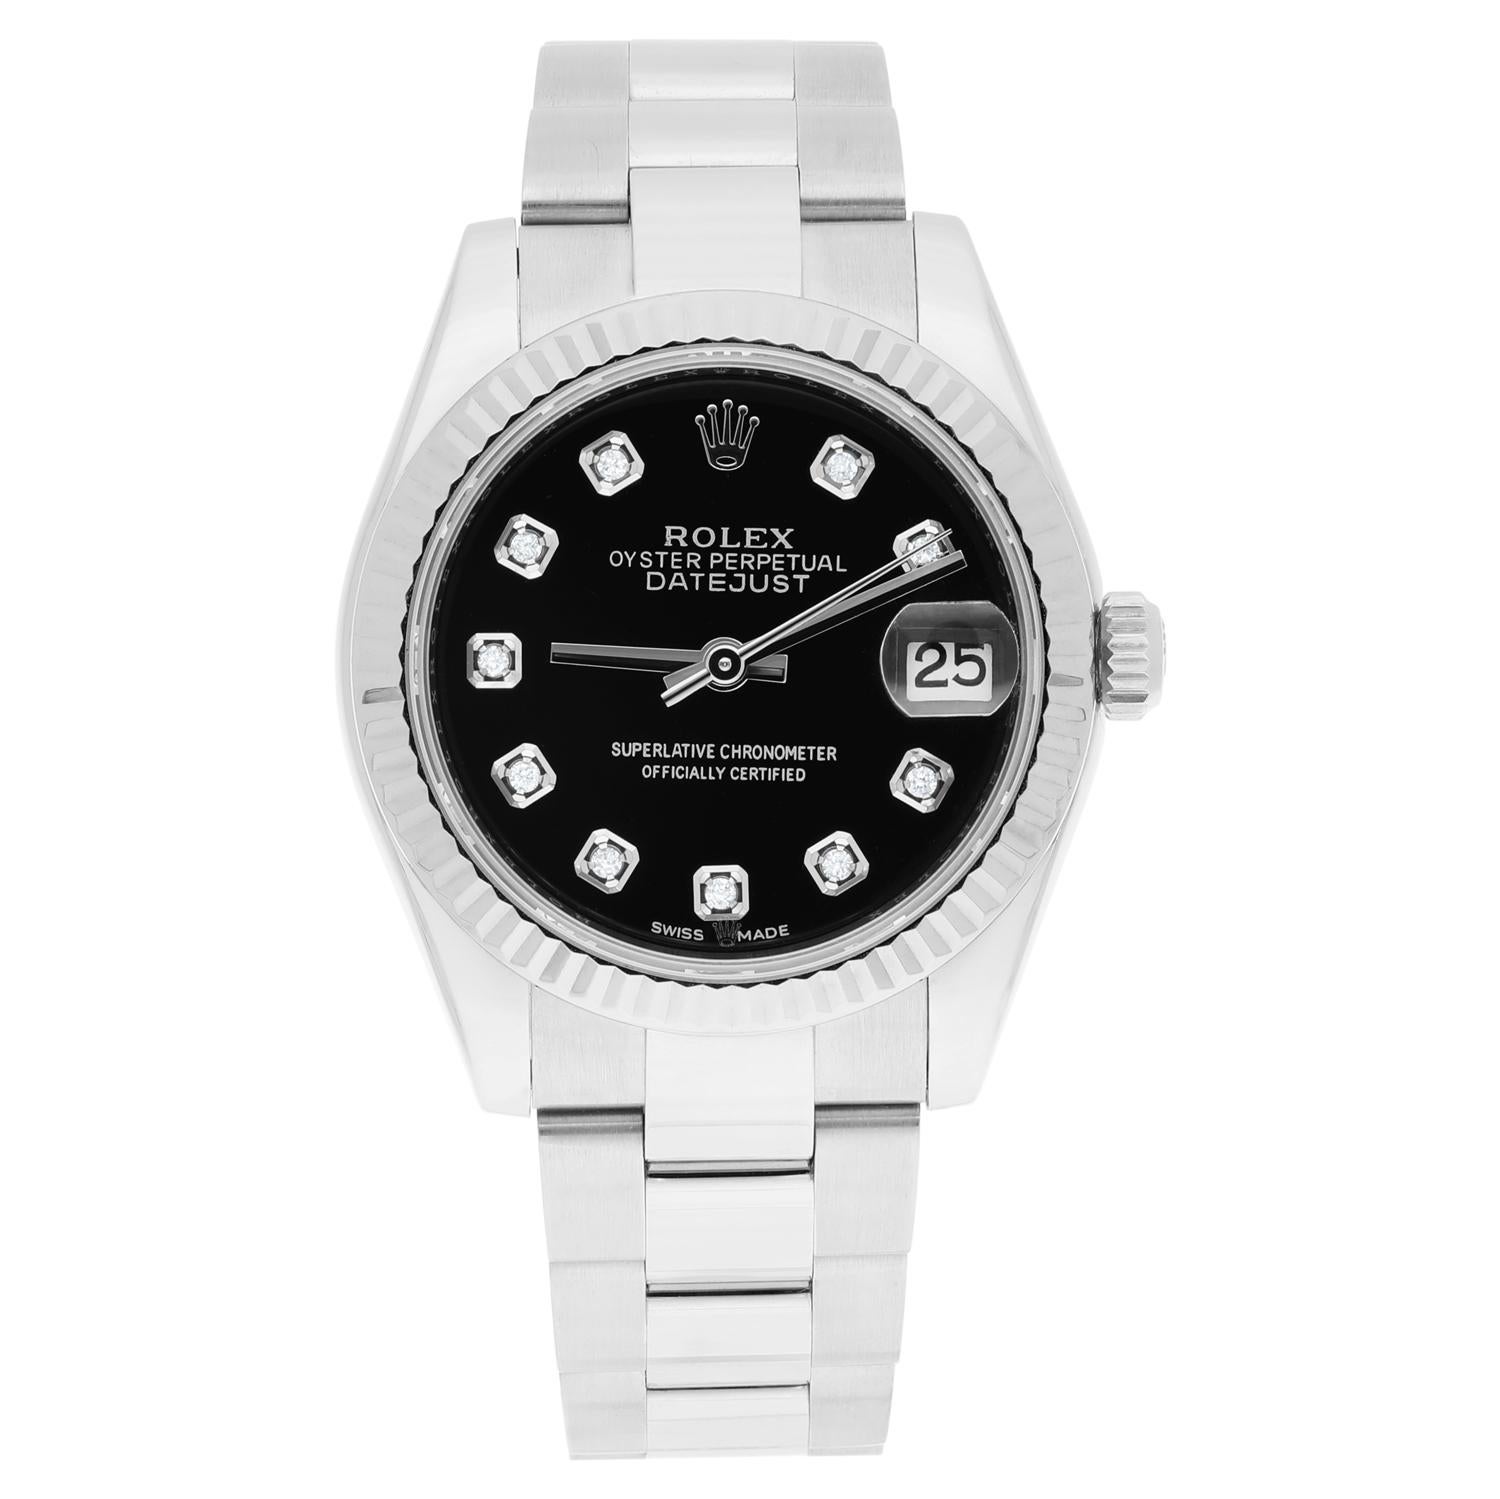 This Rolex Lady-Datejust 31mm wristwatch is a luxurious timepiece designed for women who appreciate style and functionality. The watch features a custom black dial with diamond markers that add a touch of elegance to any outfit. It has a fluted